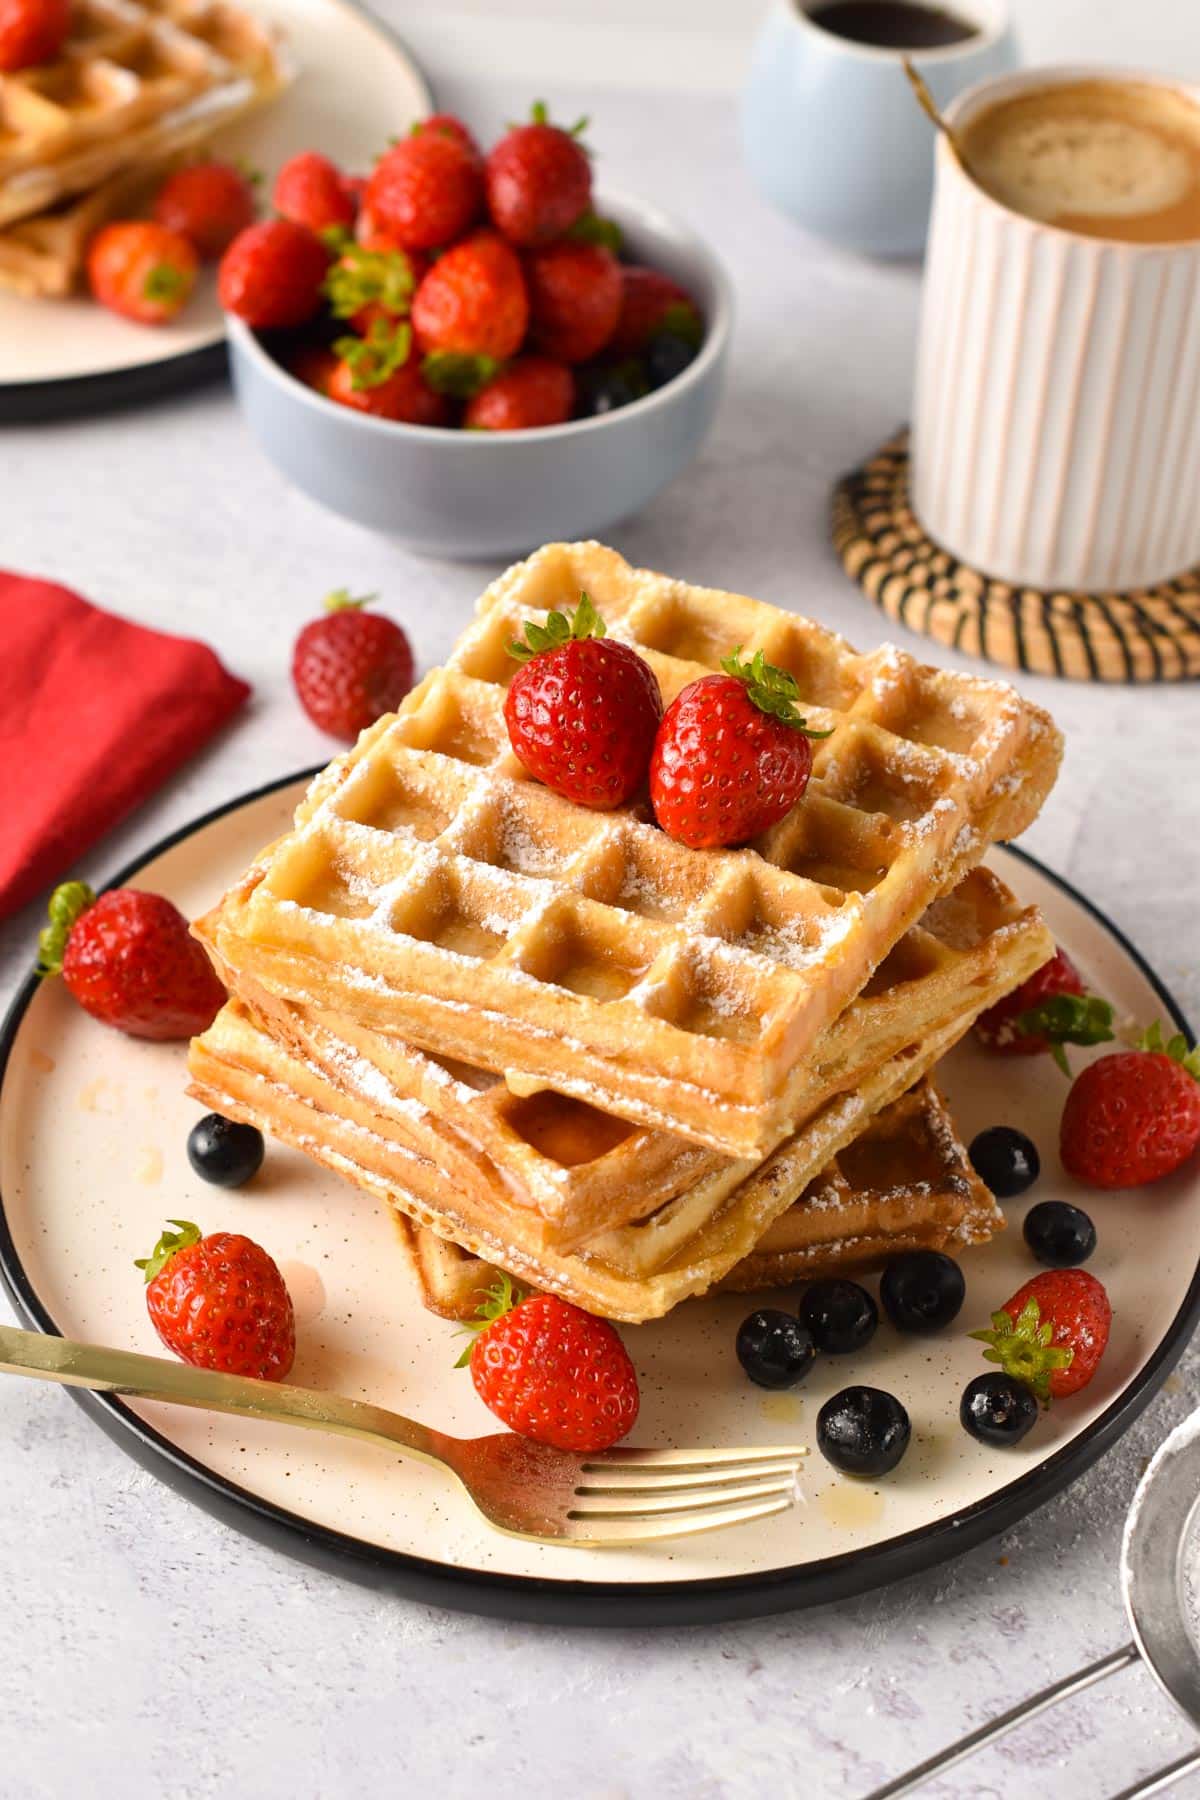 These Vegan Waffle Recipe are light, fluffy and crispy vegan Belgian waffles perfect as a week-end comforting breakfast.